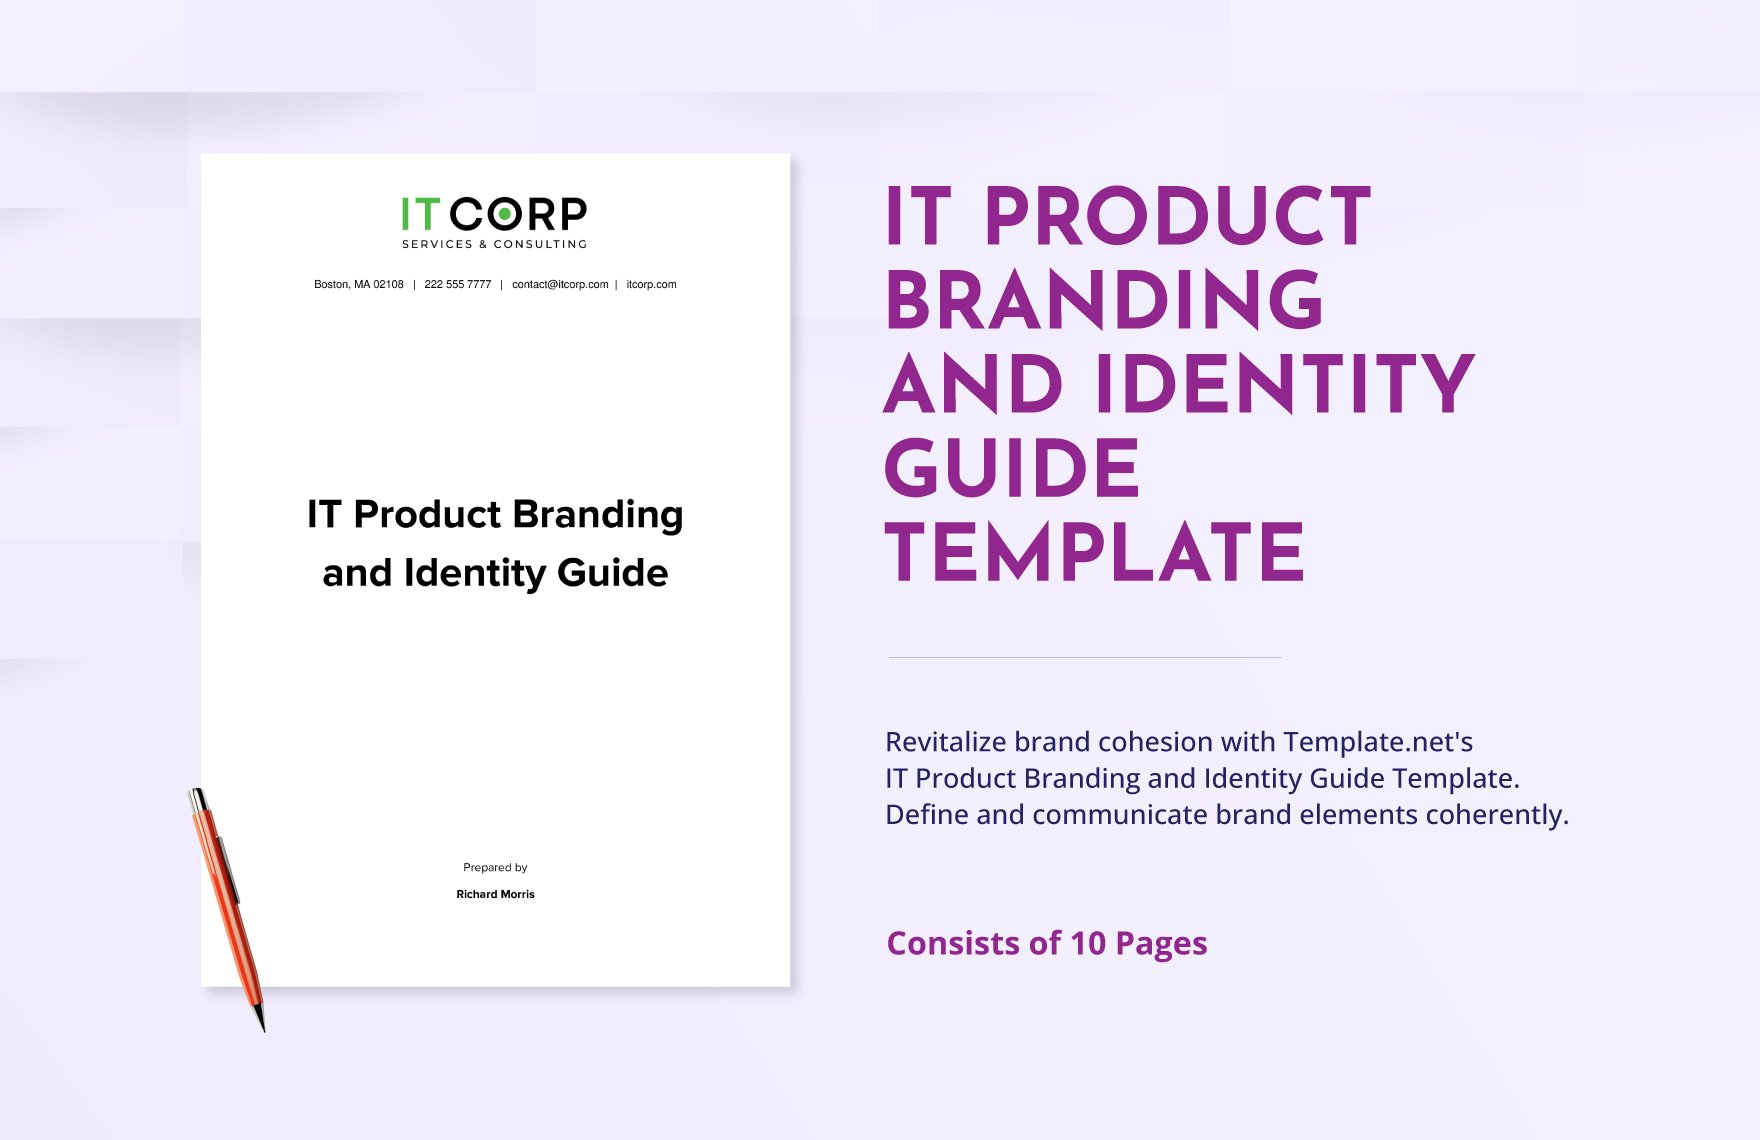 IT Product Branding and Identity Guide Template